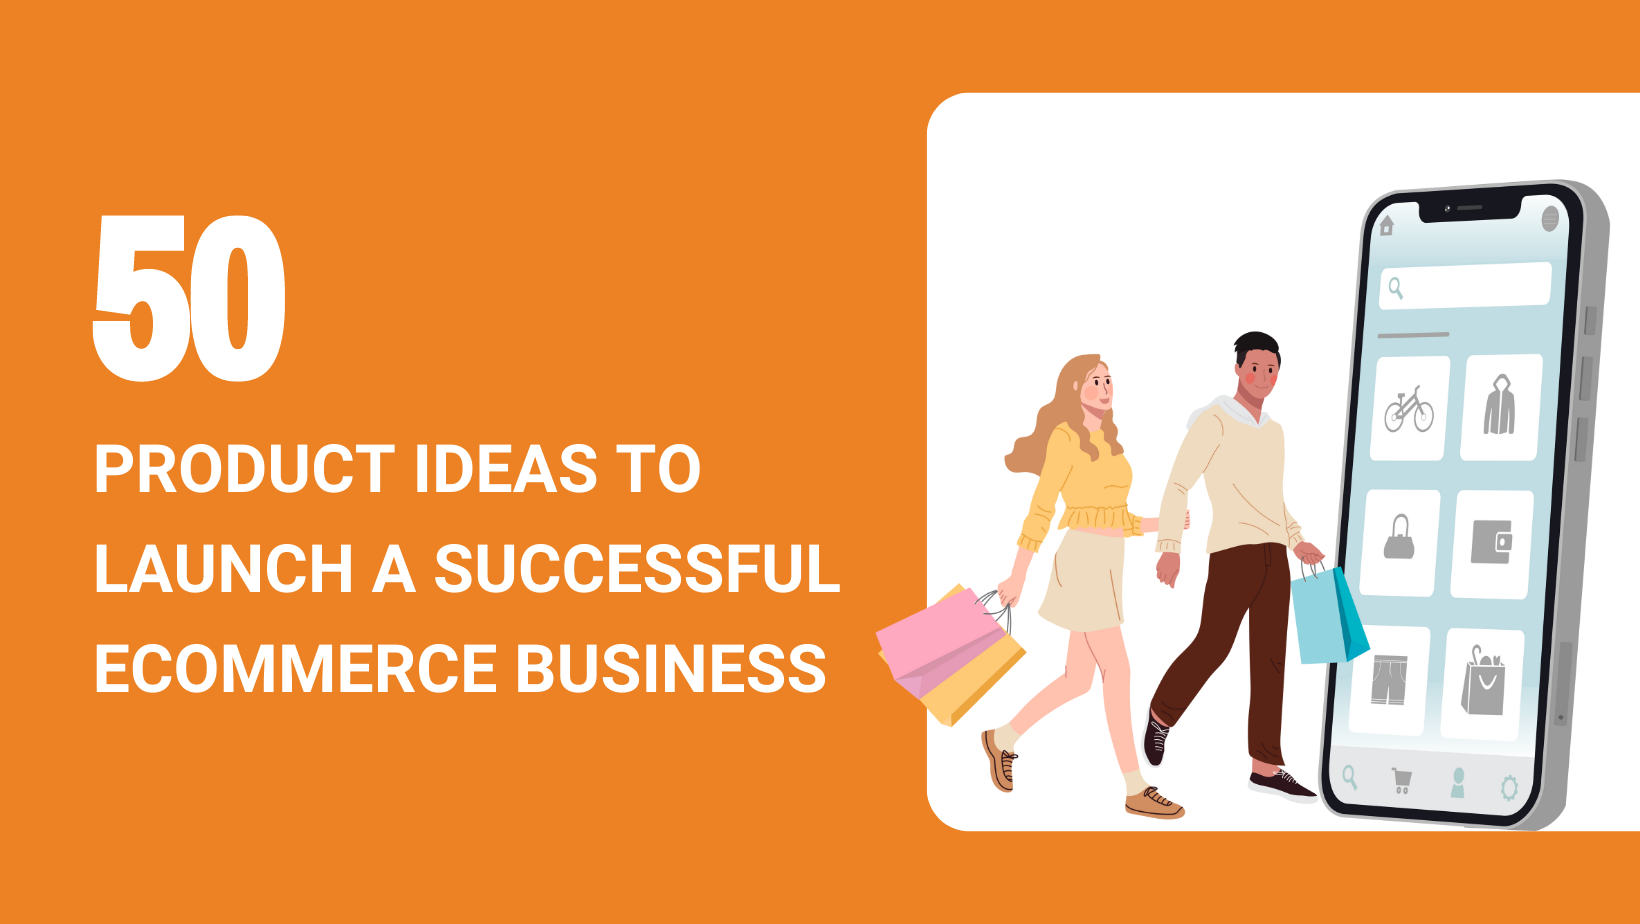 50 PRODUCT IDEAS TO LAUNCH A SUCCESSFUL ECOMMERCE BUSINESS